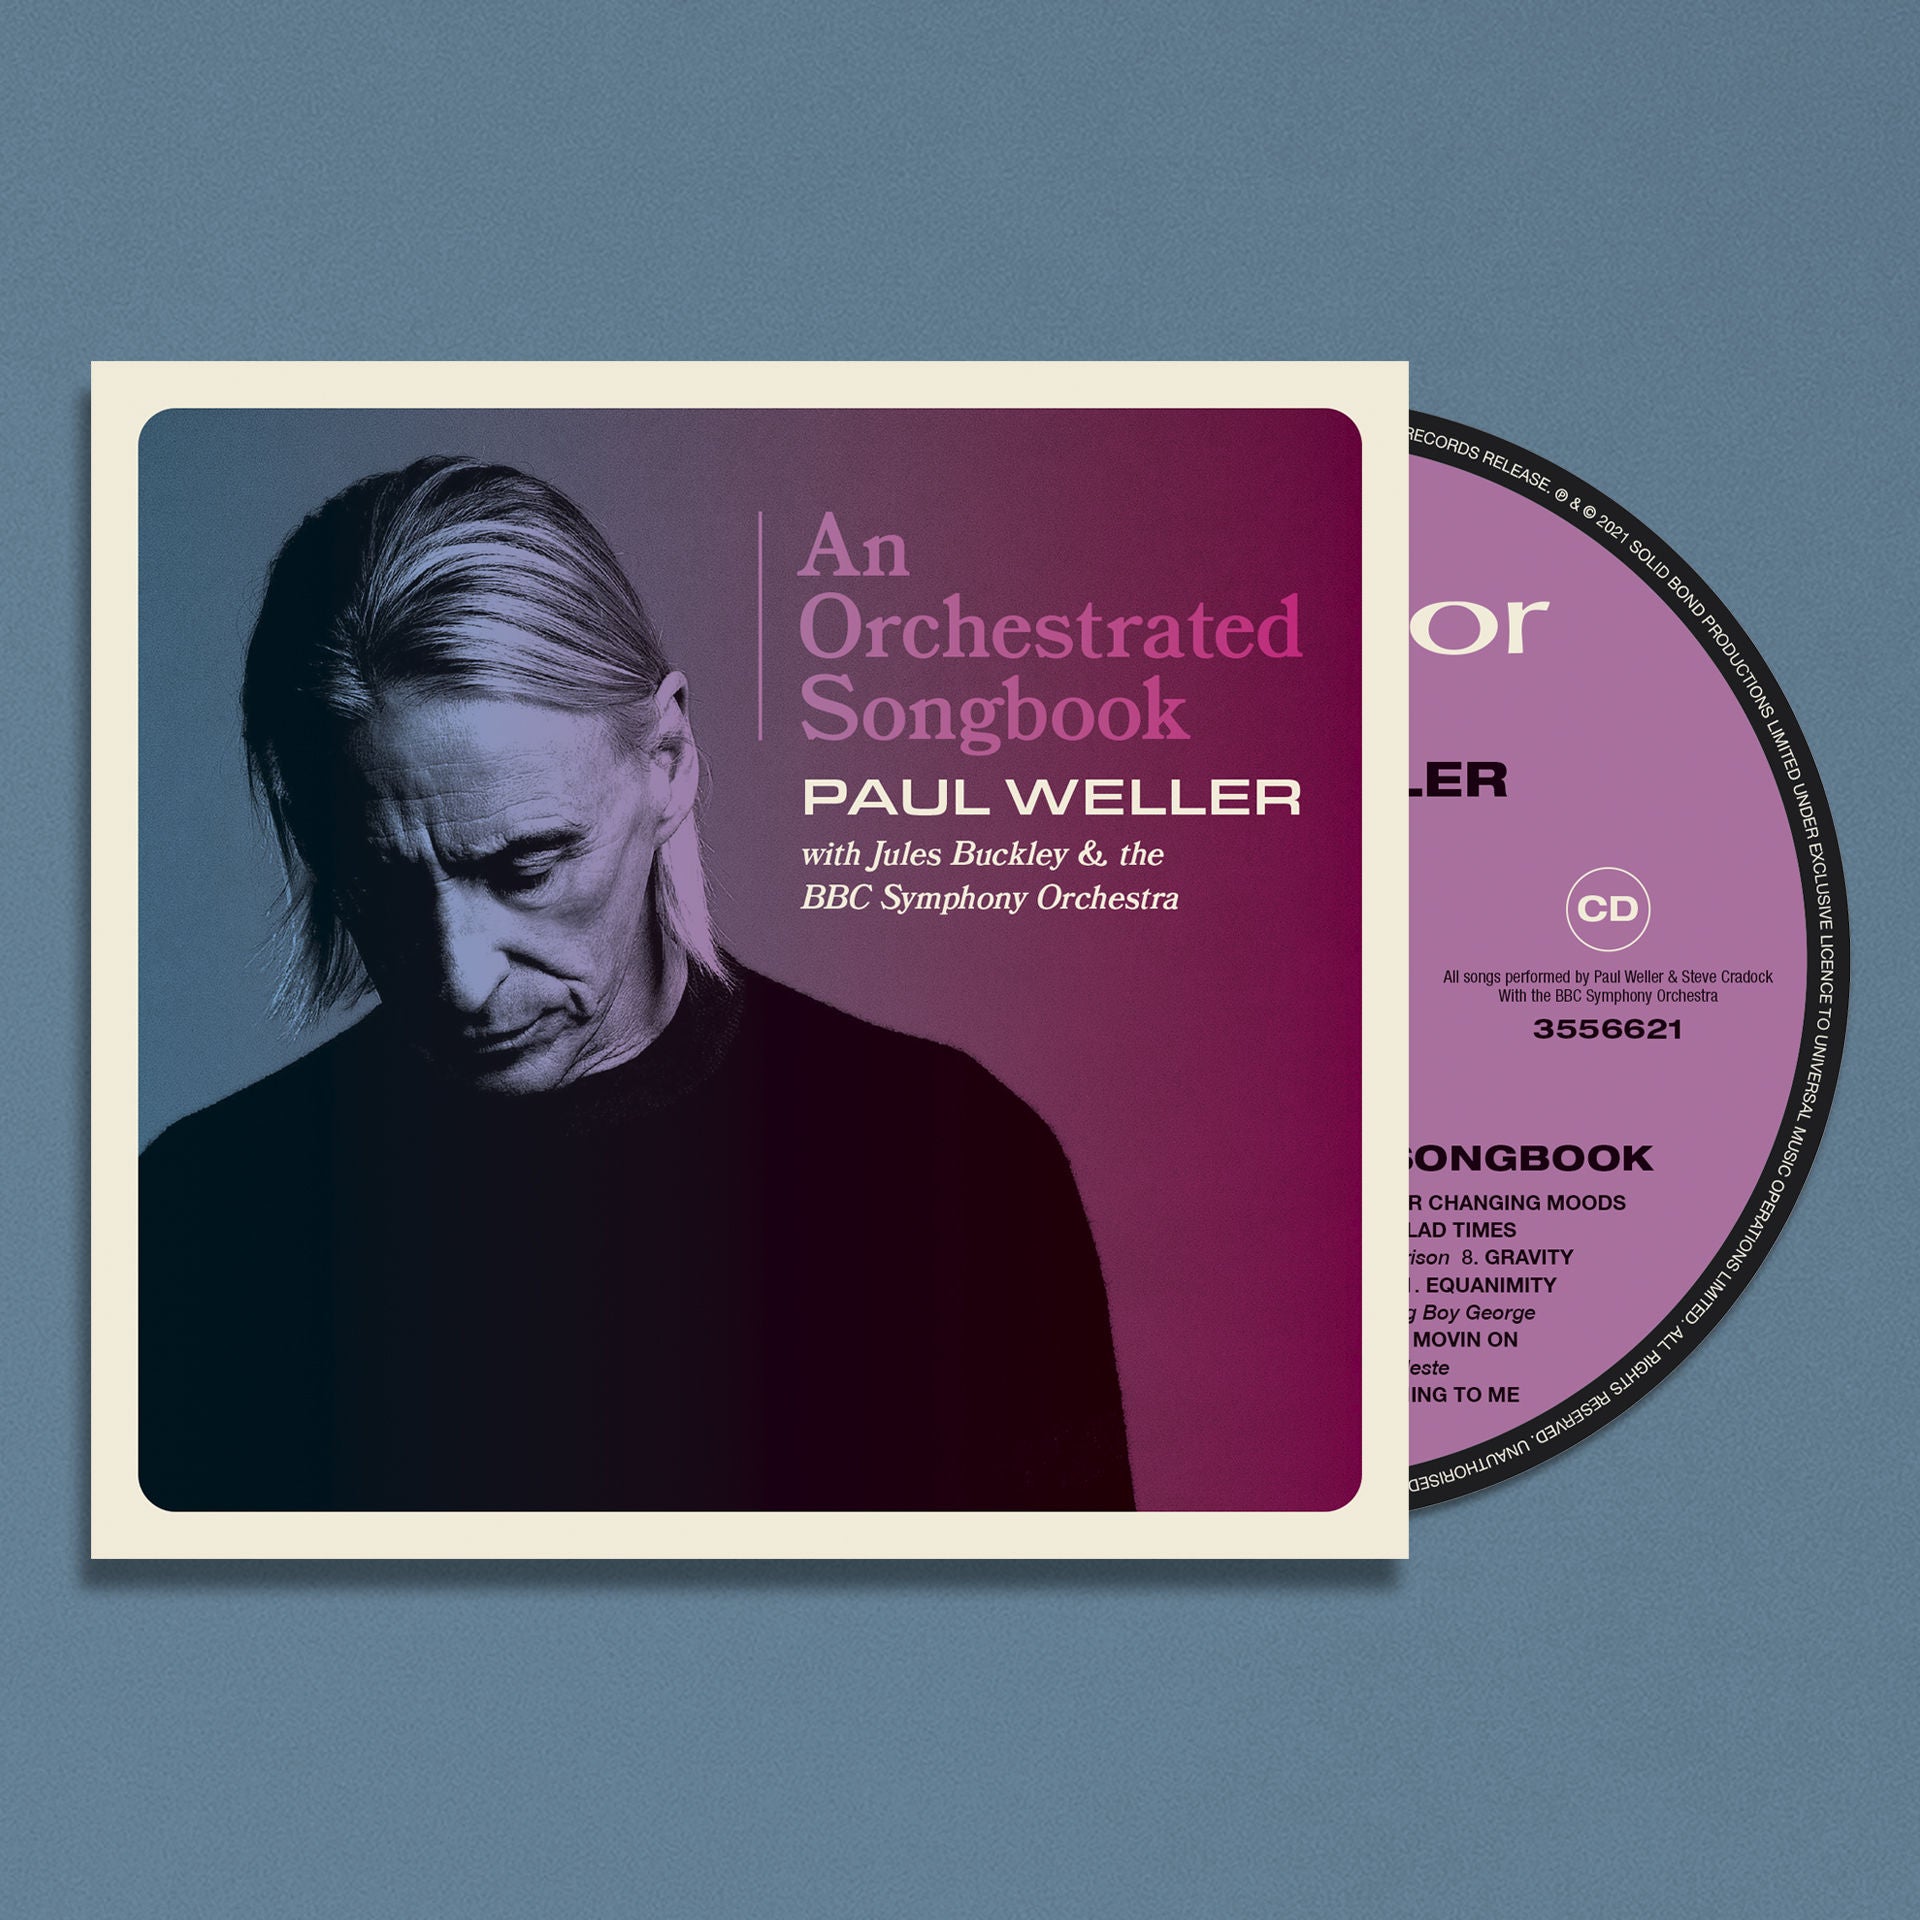 Paul Weller - An Orchestrated Songbook Standard CD